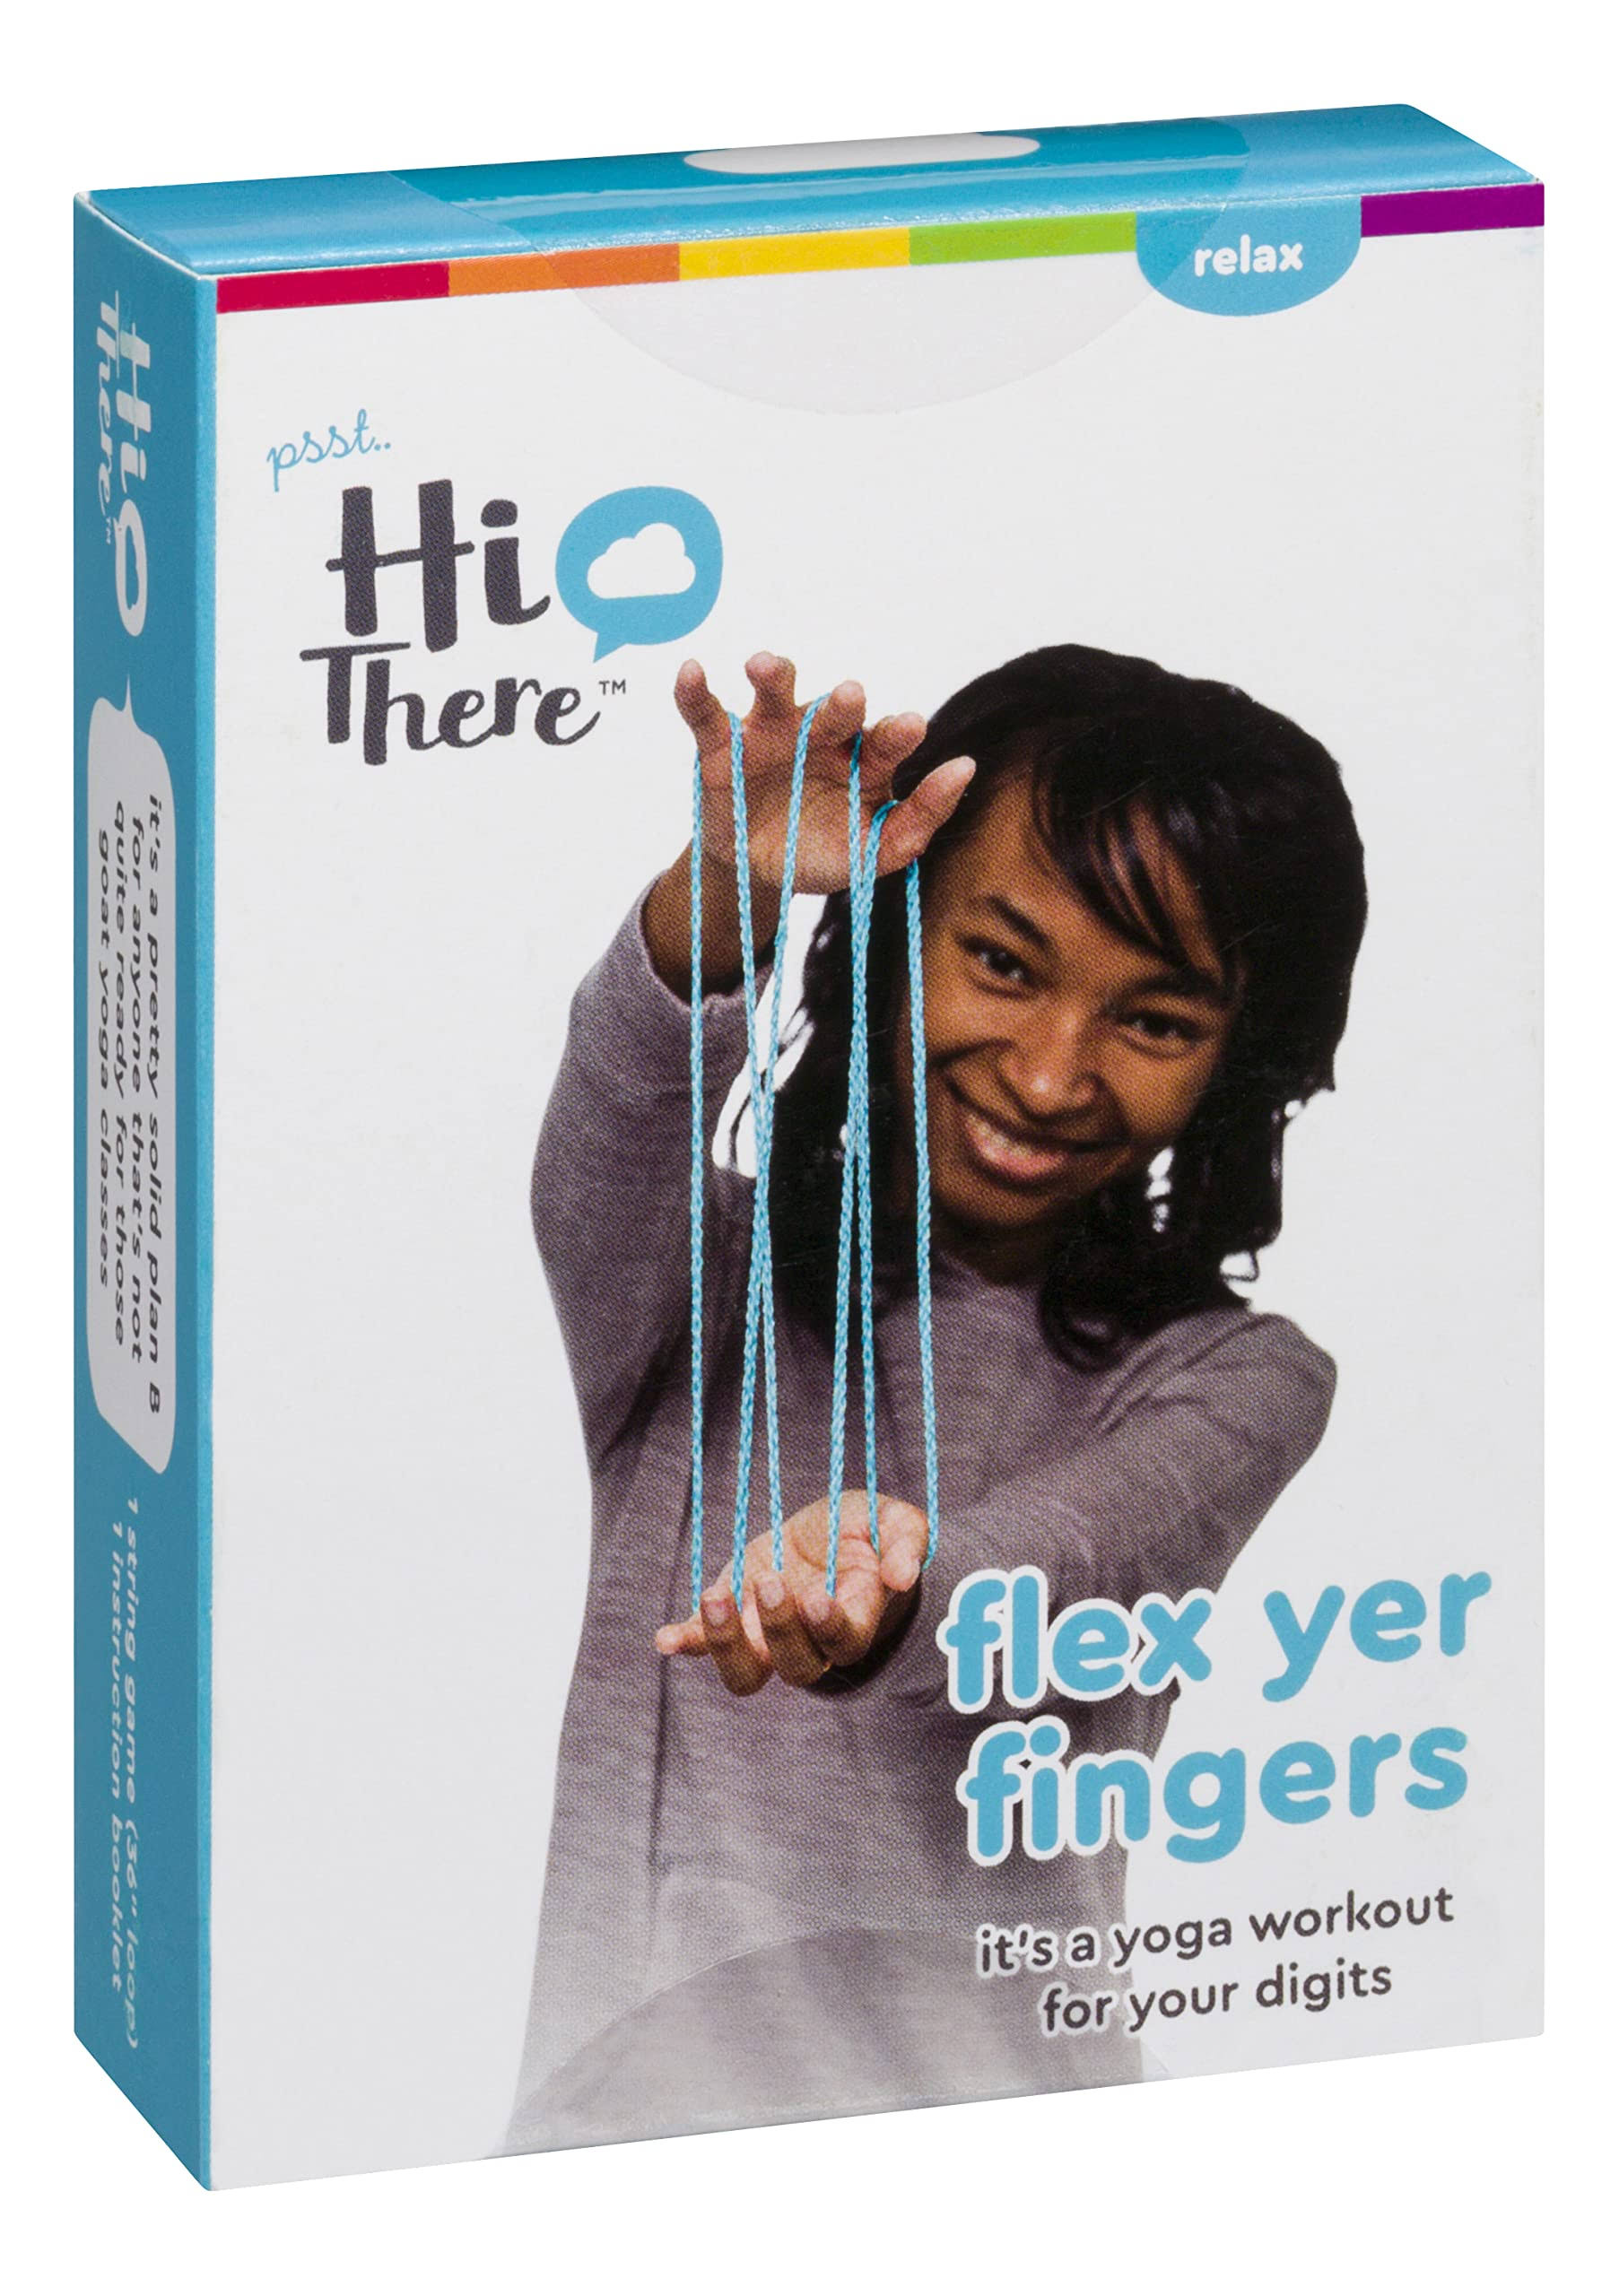 Hi There: Relax - Flex Yer Fingers